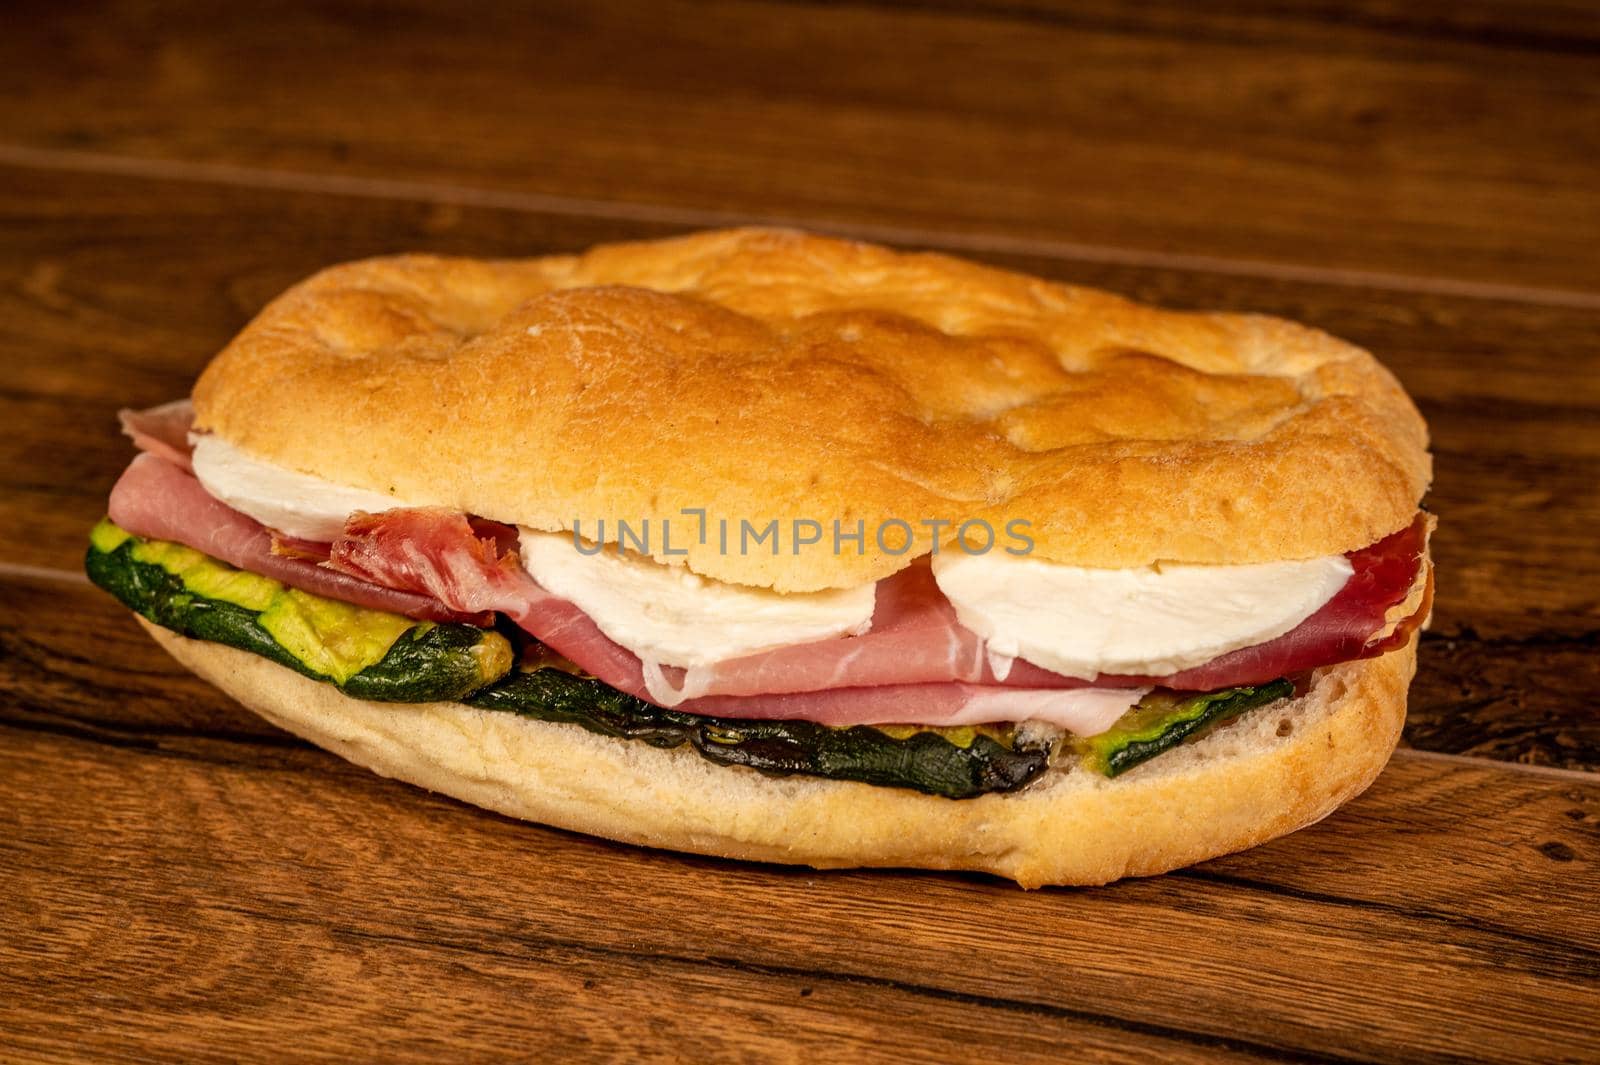 stuffed focaccia with cold cuts and vegetables on a wooden surface